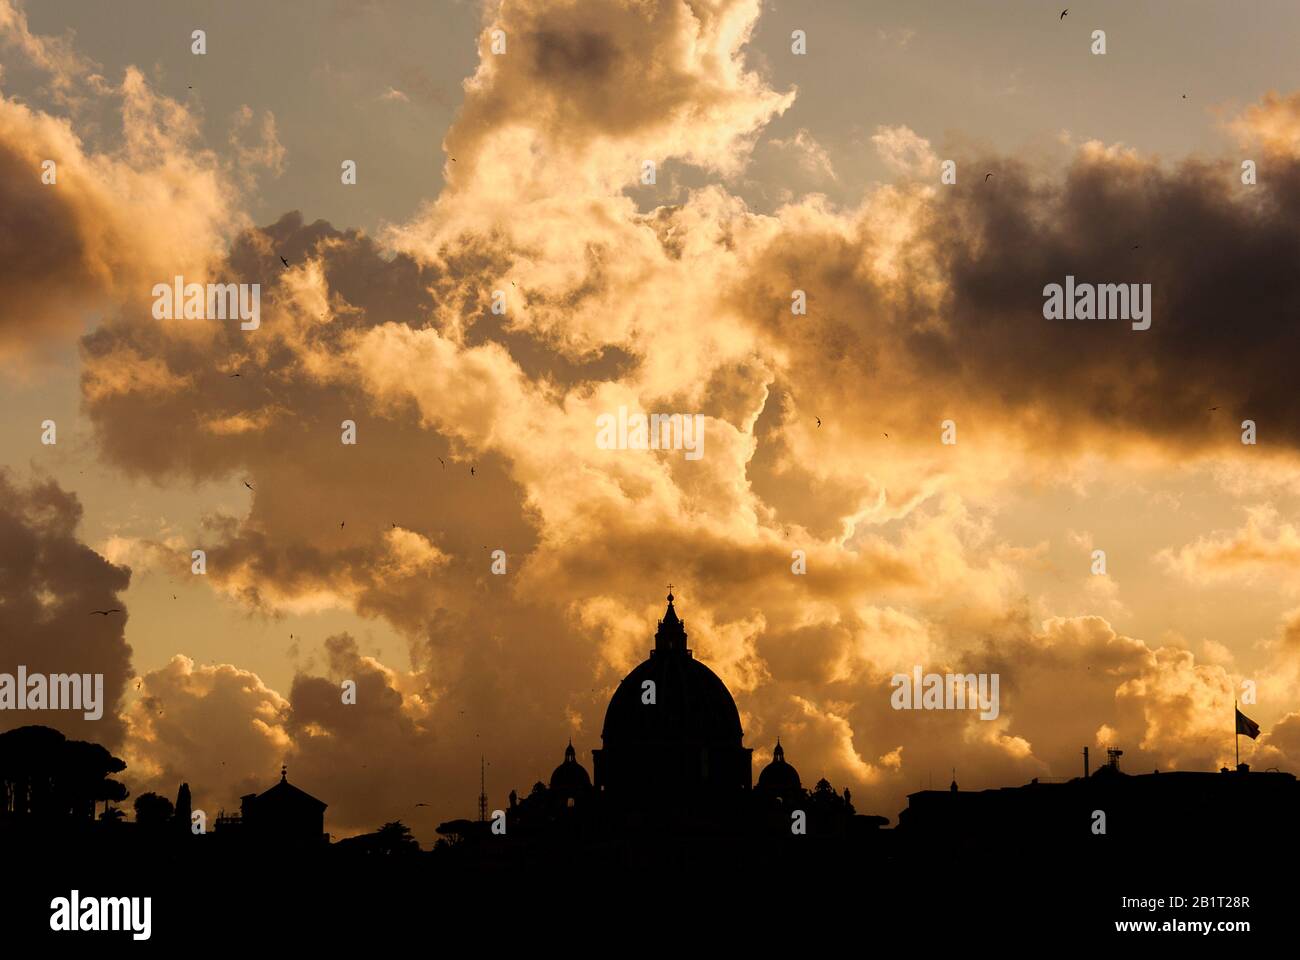 Beautiful sunset sky and clouds over Rome historic center skyline with the famous and iconic St Peter's Dome Stock Photo